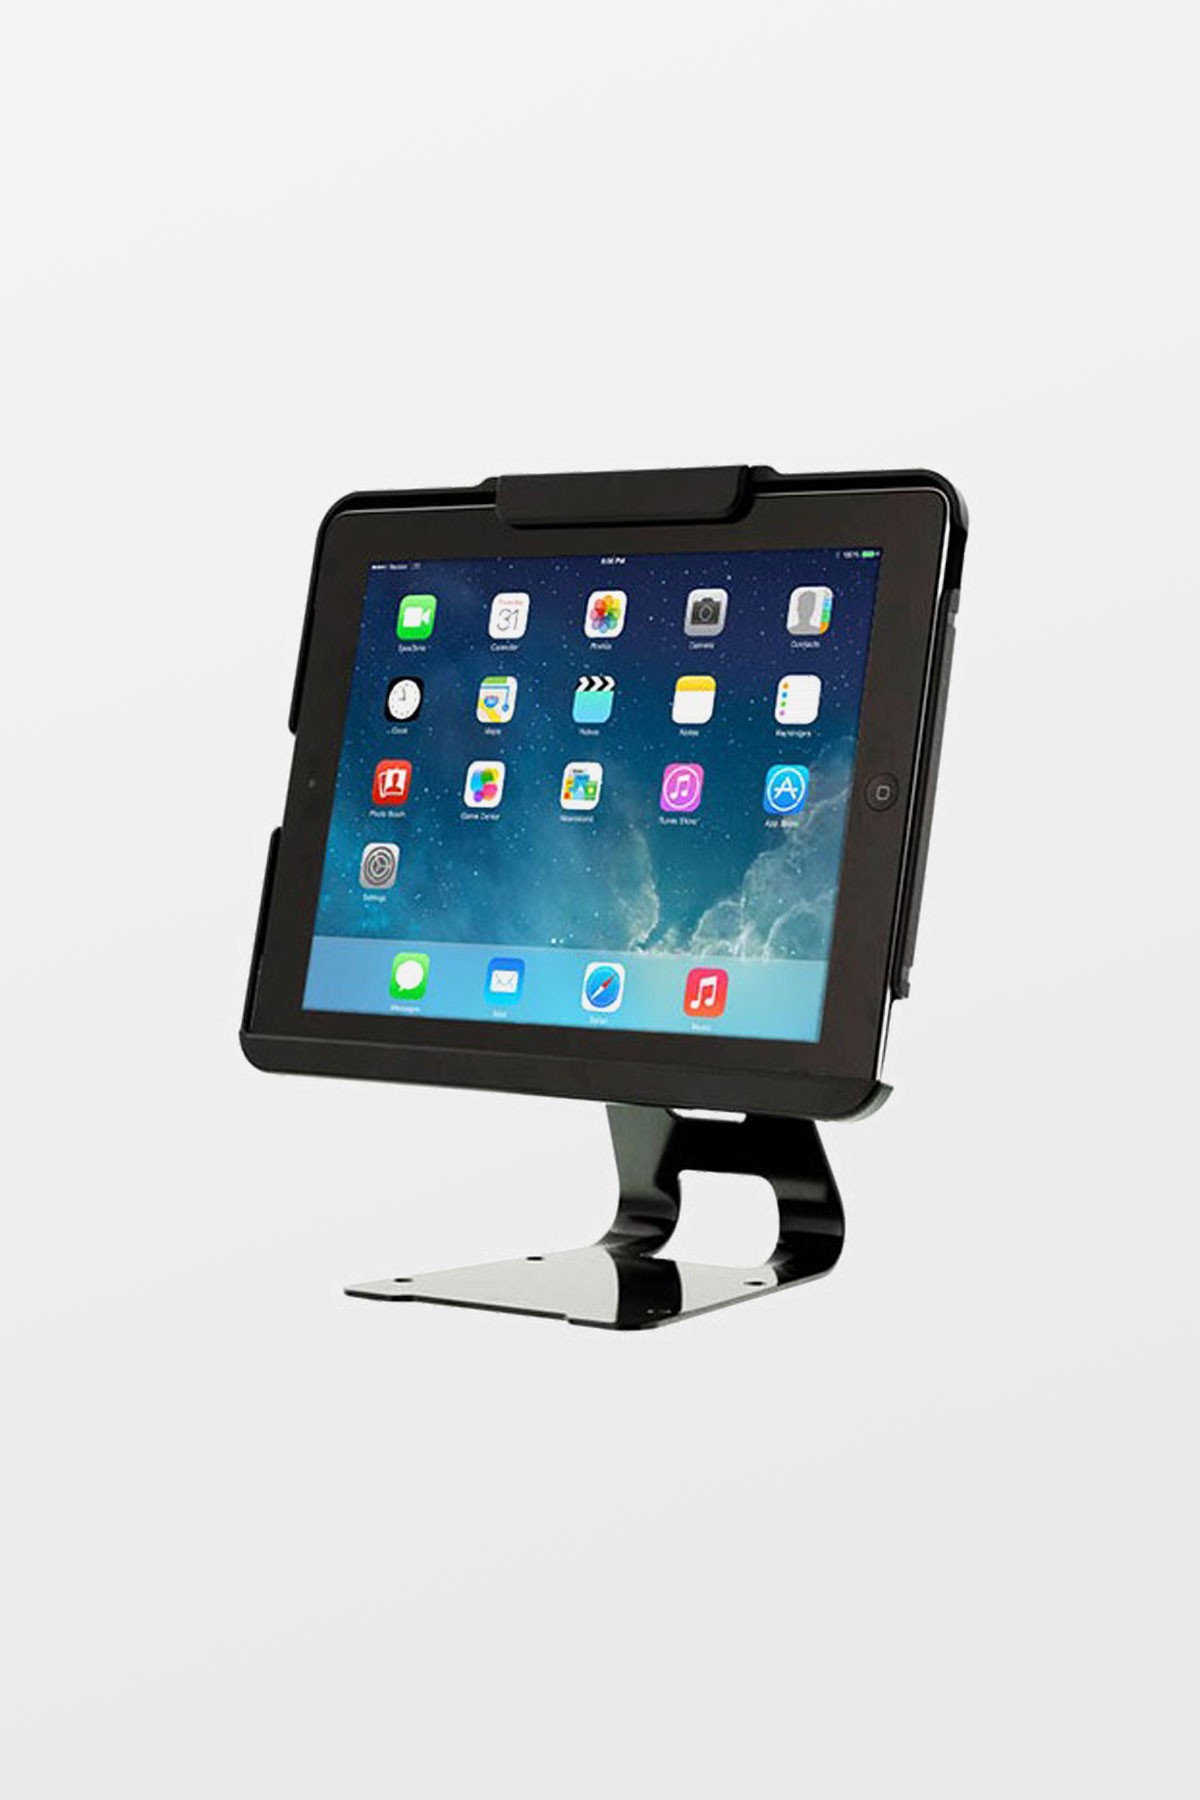 Tryten iPad Flip Stand (Black) - Comes with Cable Lock and 2 user keys. Compatible with iPad 2-4 & Air 1 & 2 with air adapter kit (included).